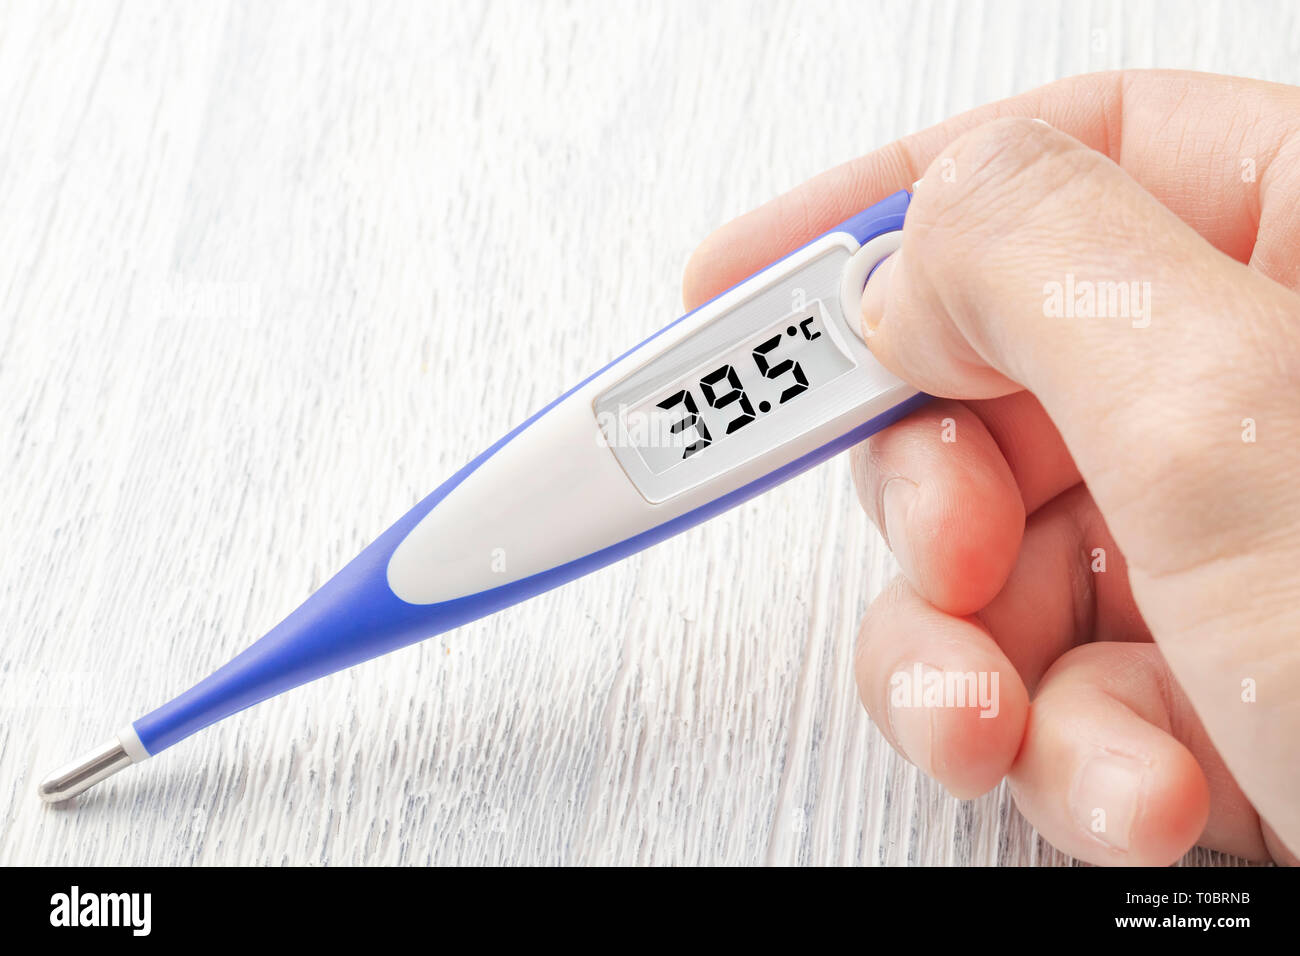 White-blue thermometer with a high temperature of 39.5 degrees Celsius in hand on a white wooden background Stock Photo